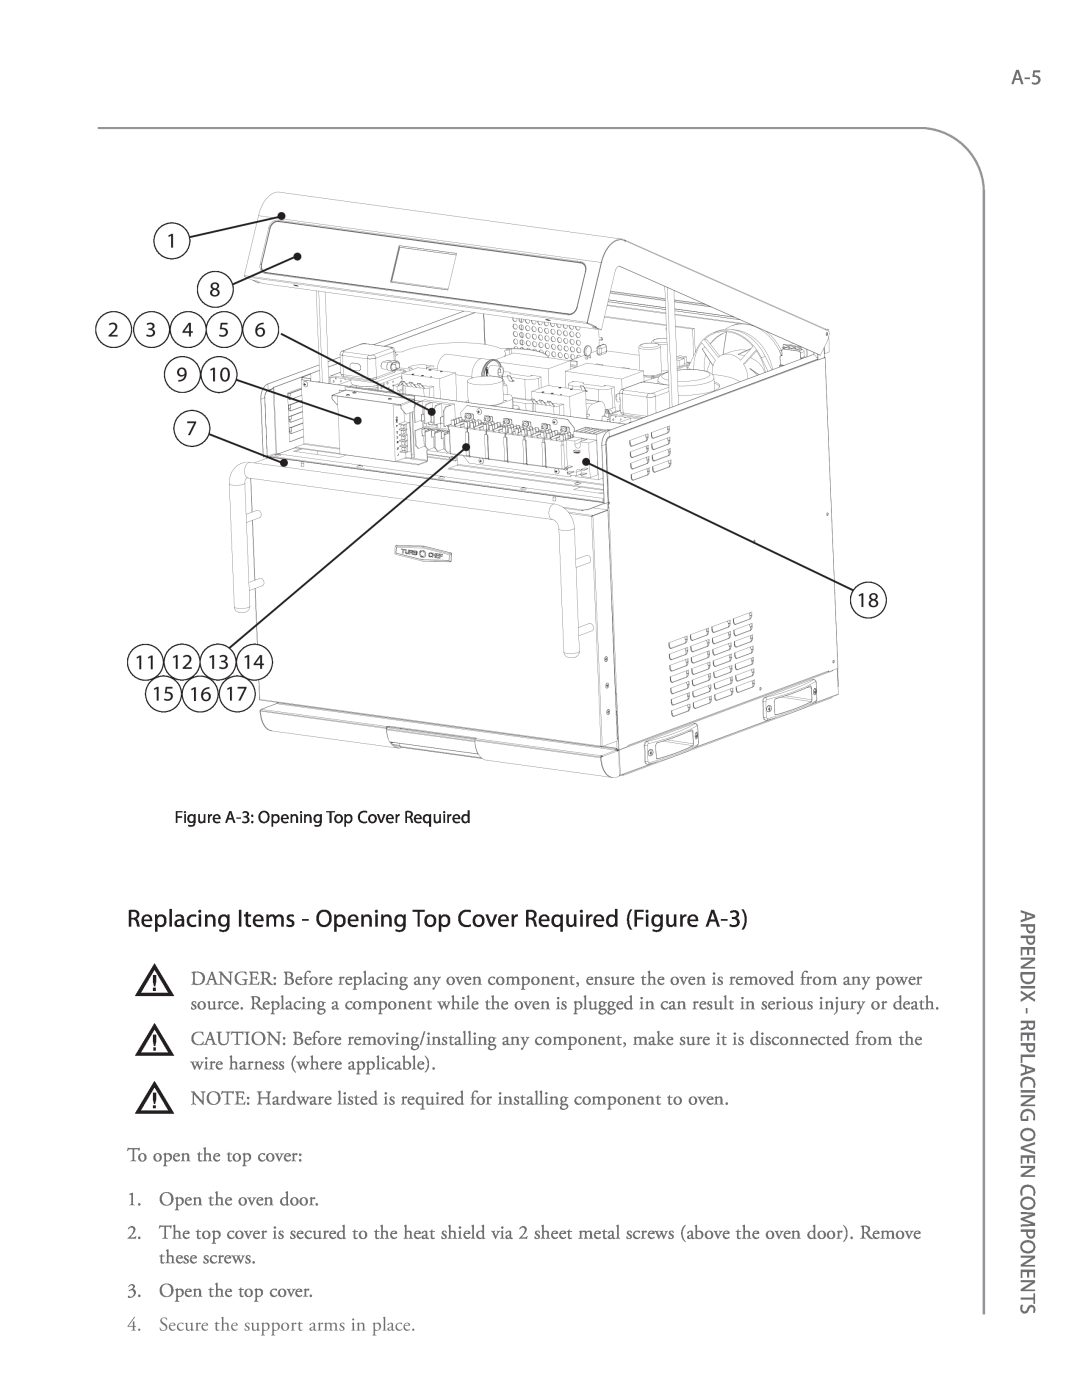 Turbo Chef Technologies i5 service manual Replacing Items - Opening Top Cover Required Figure A-3, 11 12 